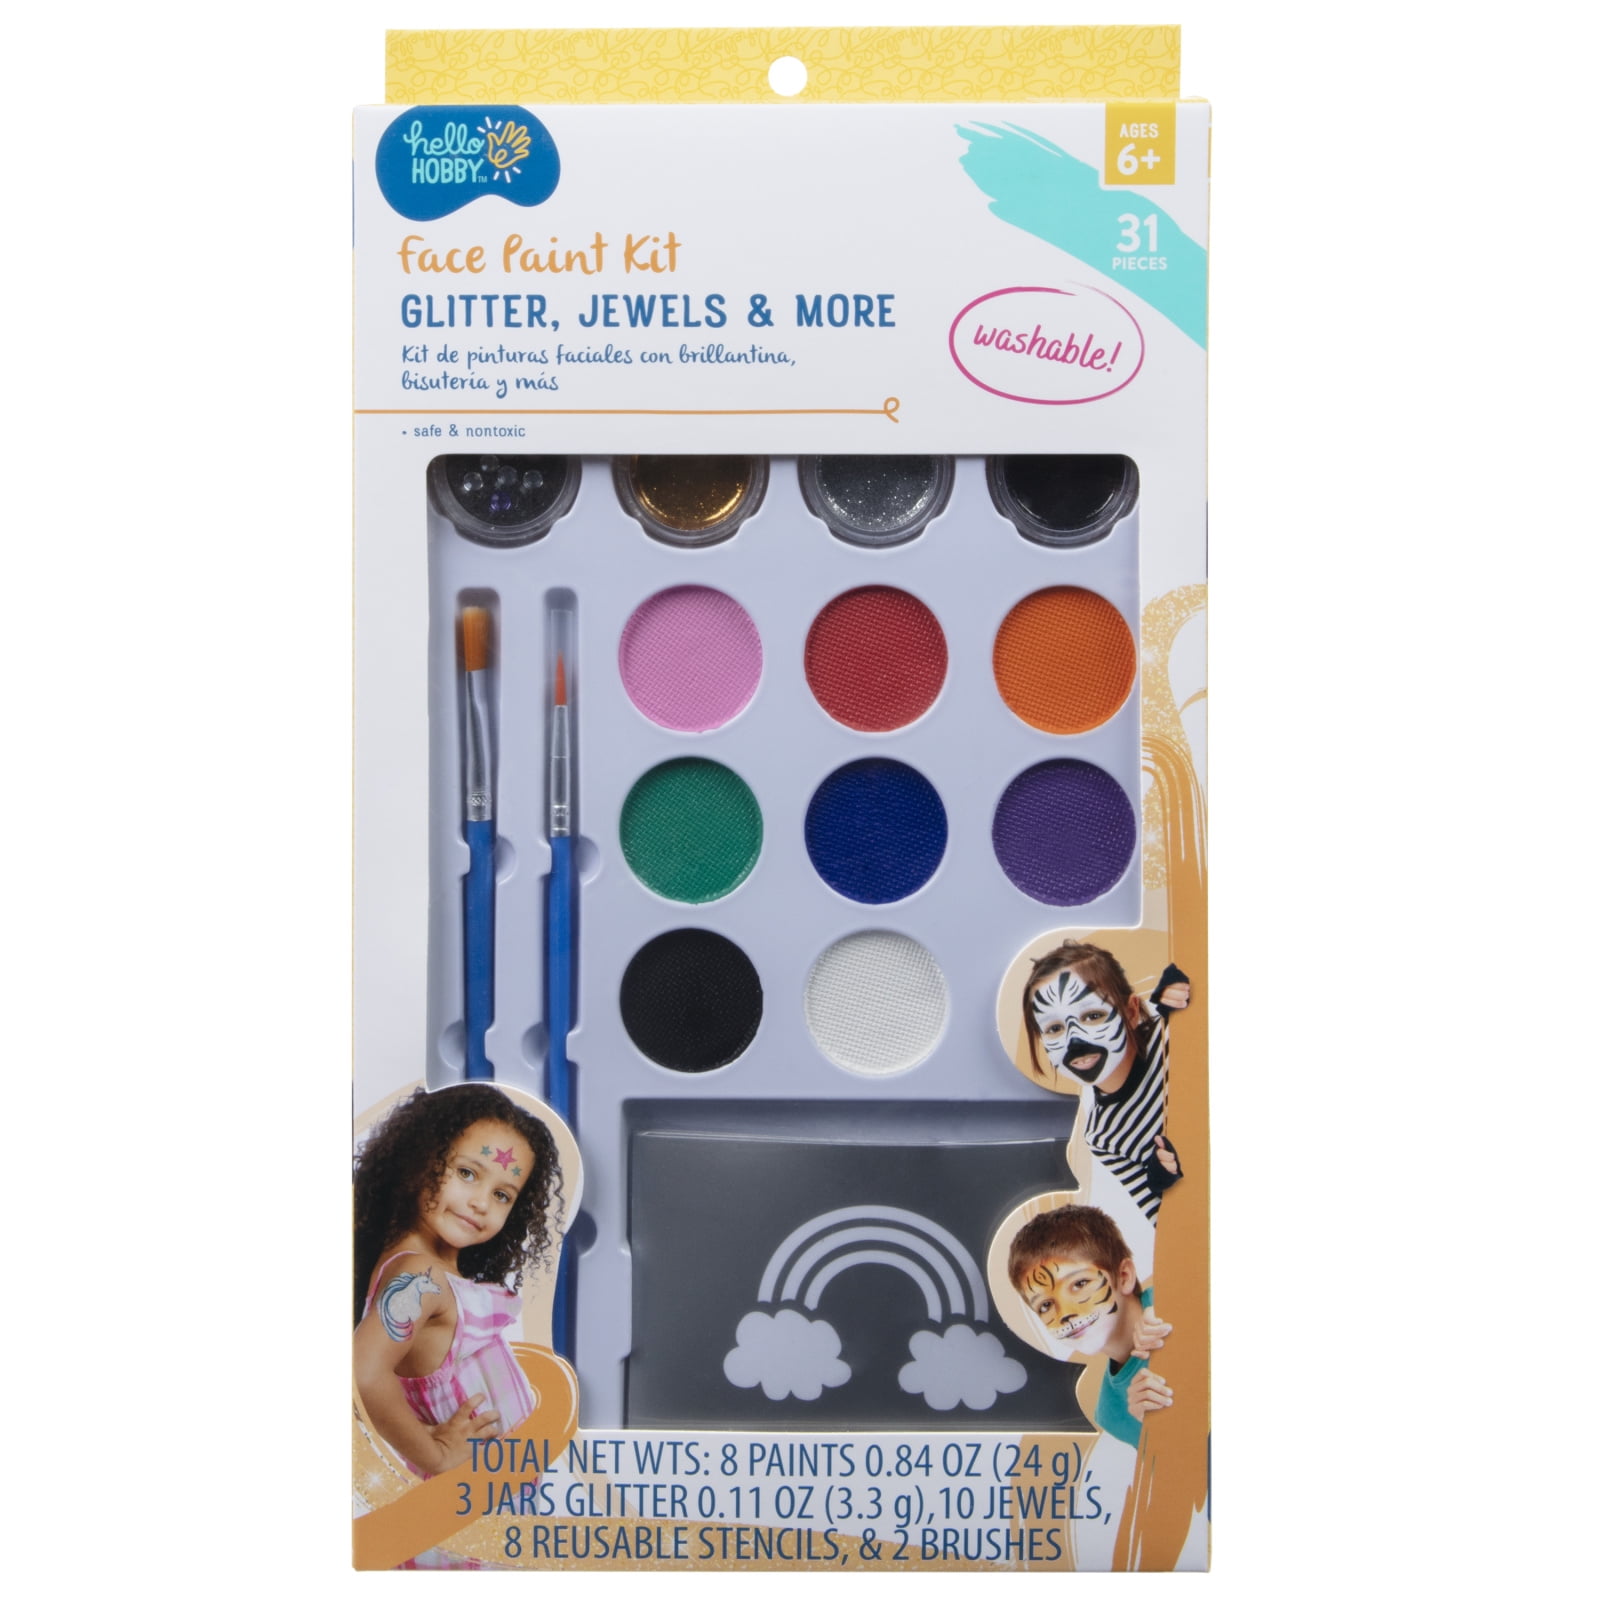 Easy Face Paint Pen - Non-Toxic Face Painting Kit - 8 Colors Washable Face  Paint for Kids - Face and Body Paint Markers - Water Based Face Paint Pens